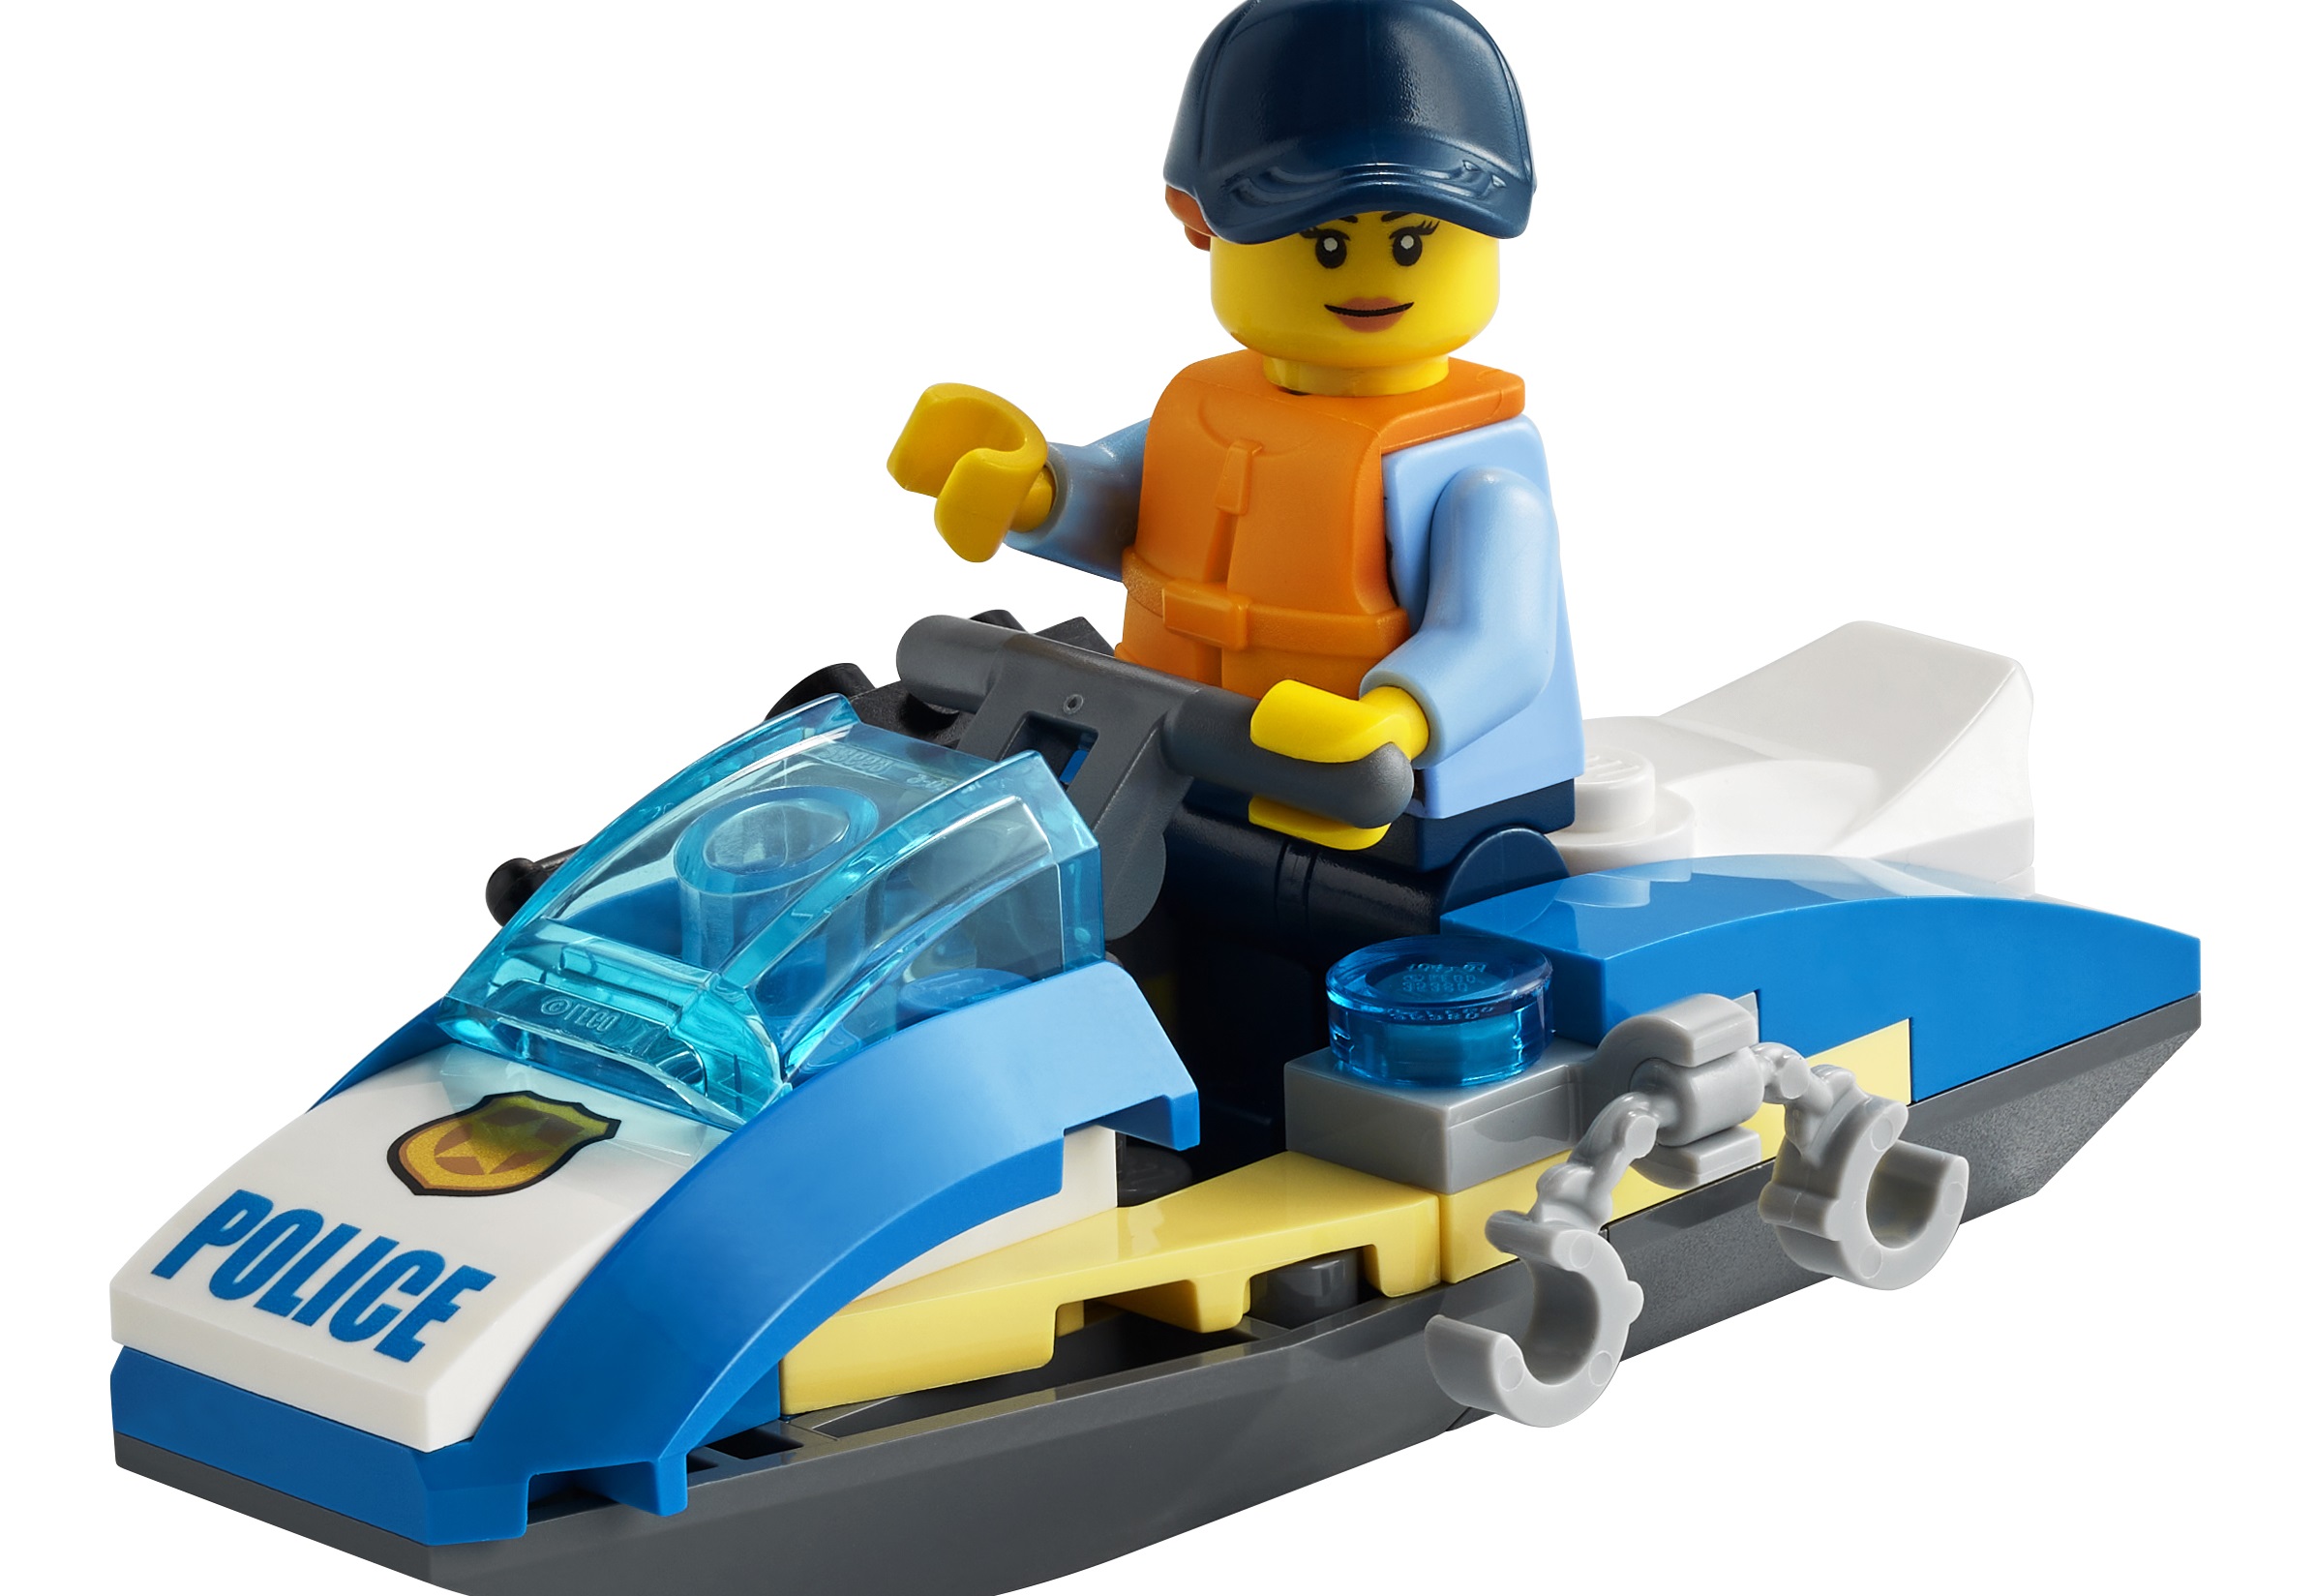 SneakQIK X LEGO - Shh, FREE LEGO Police Water Scooter set on orders over $69 with Lego promo code